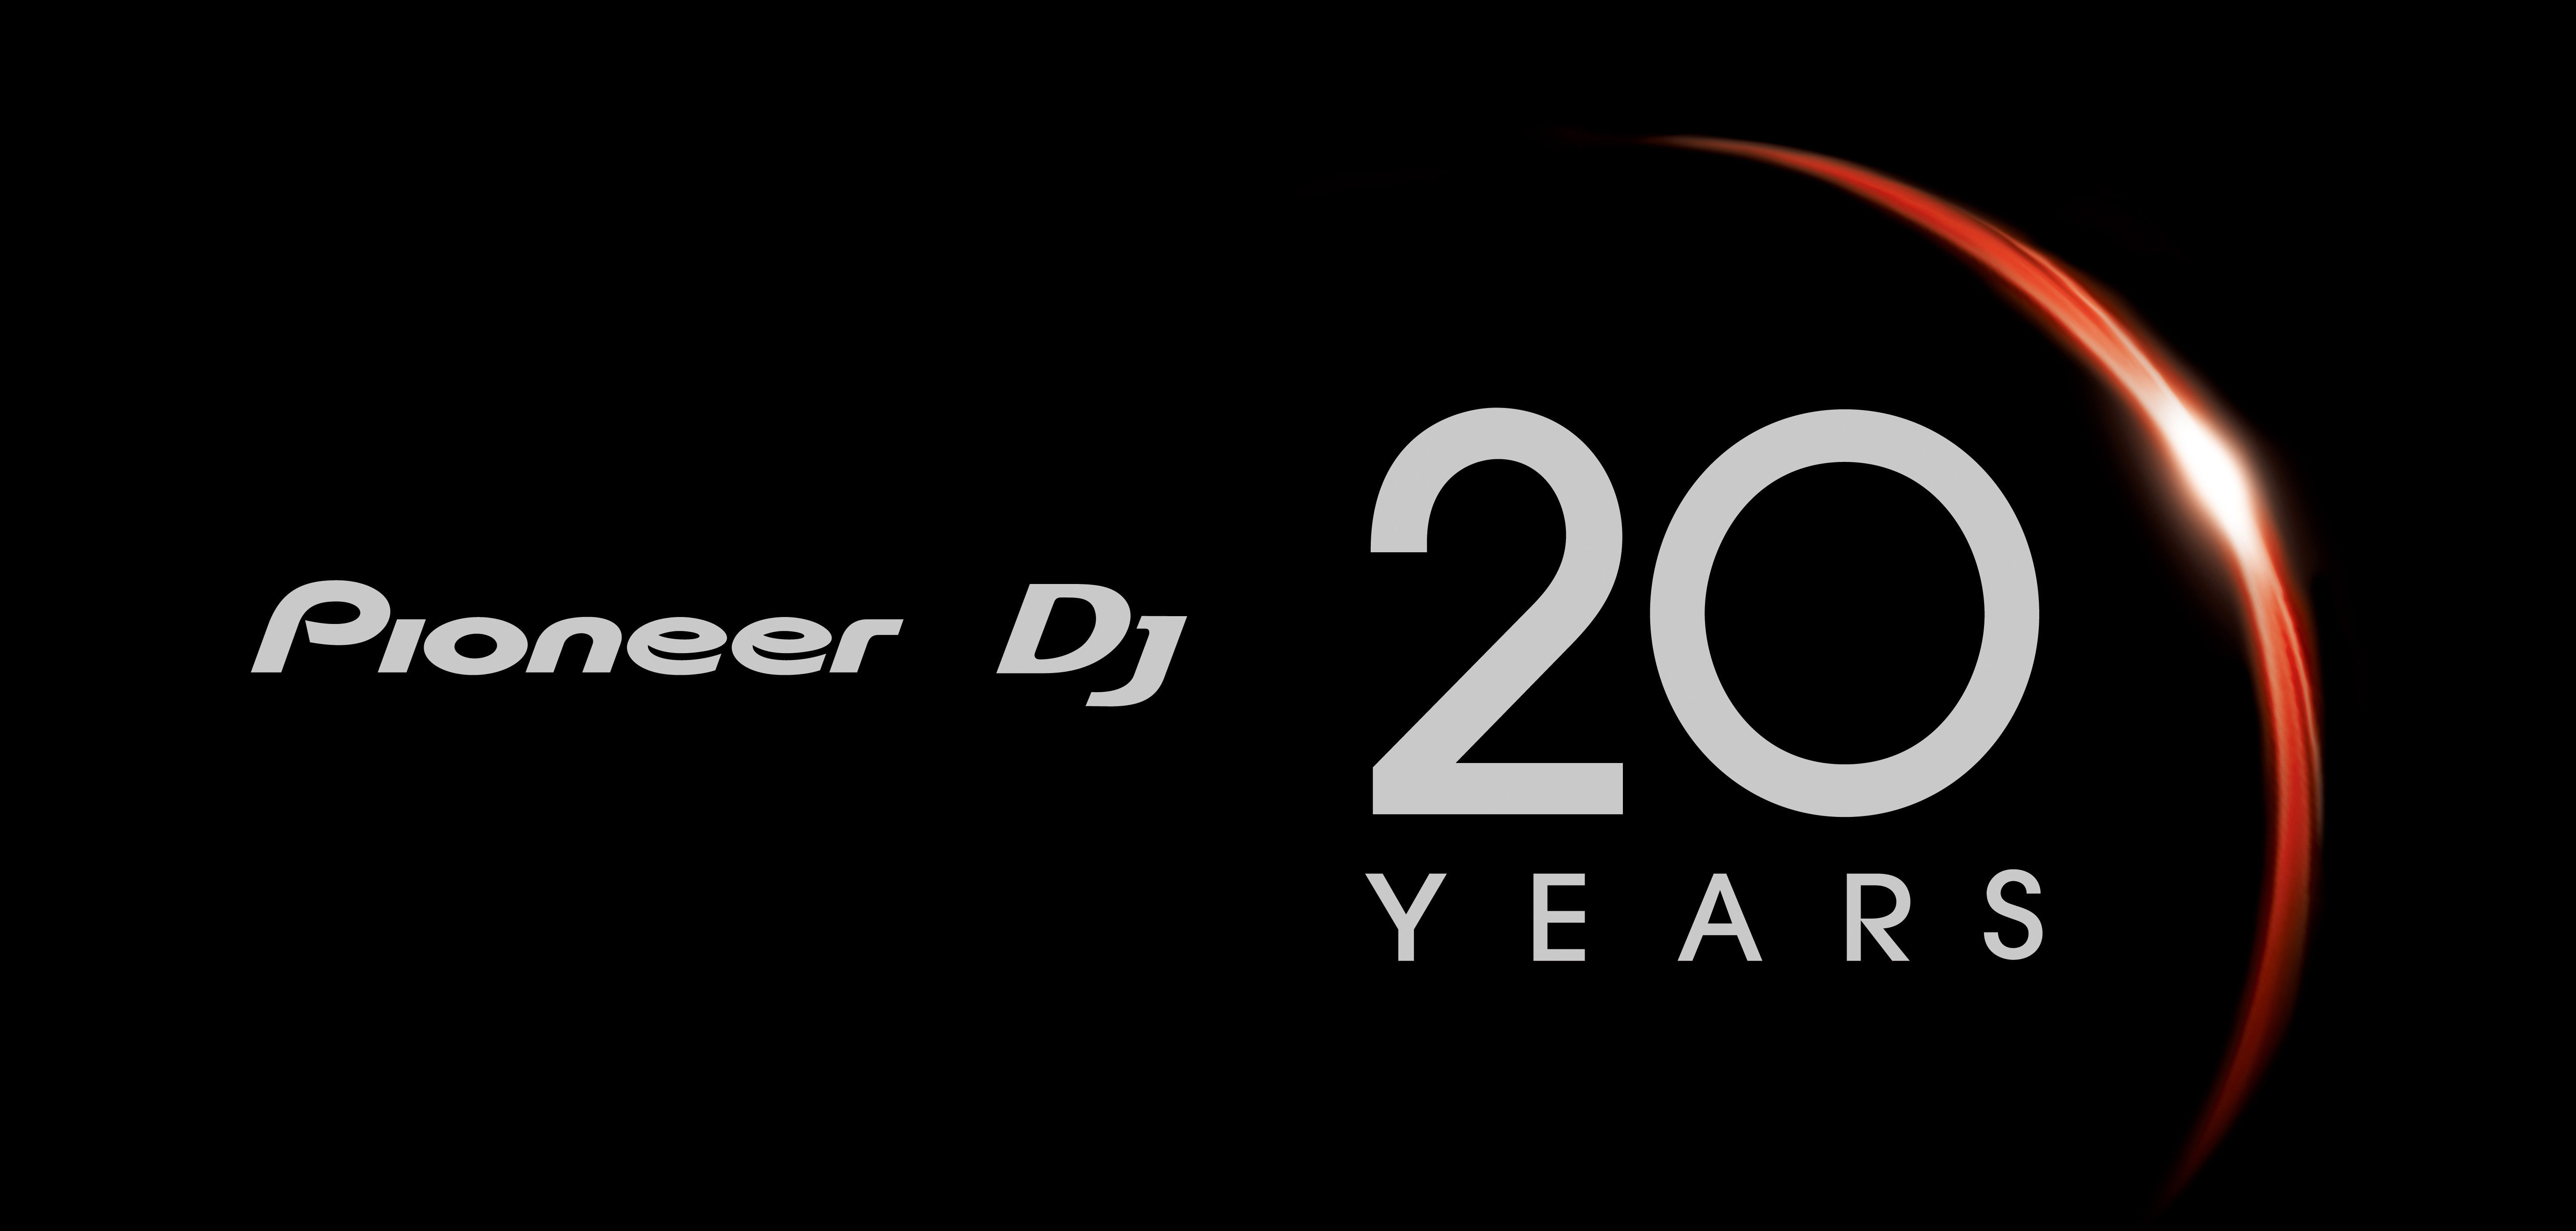 Pioneer DJ Celebrates Its 20th Anniversary by Taking Part in.